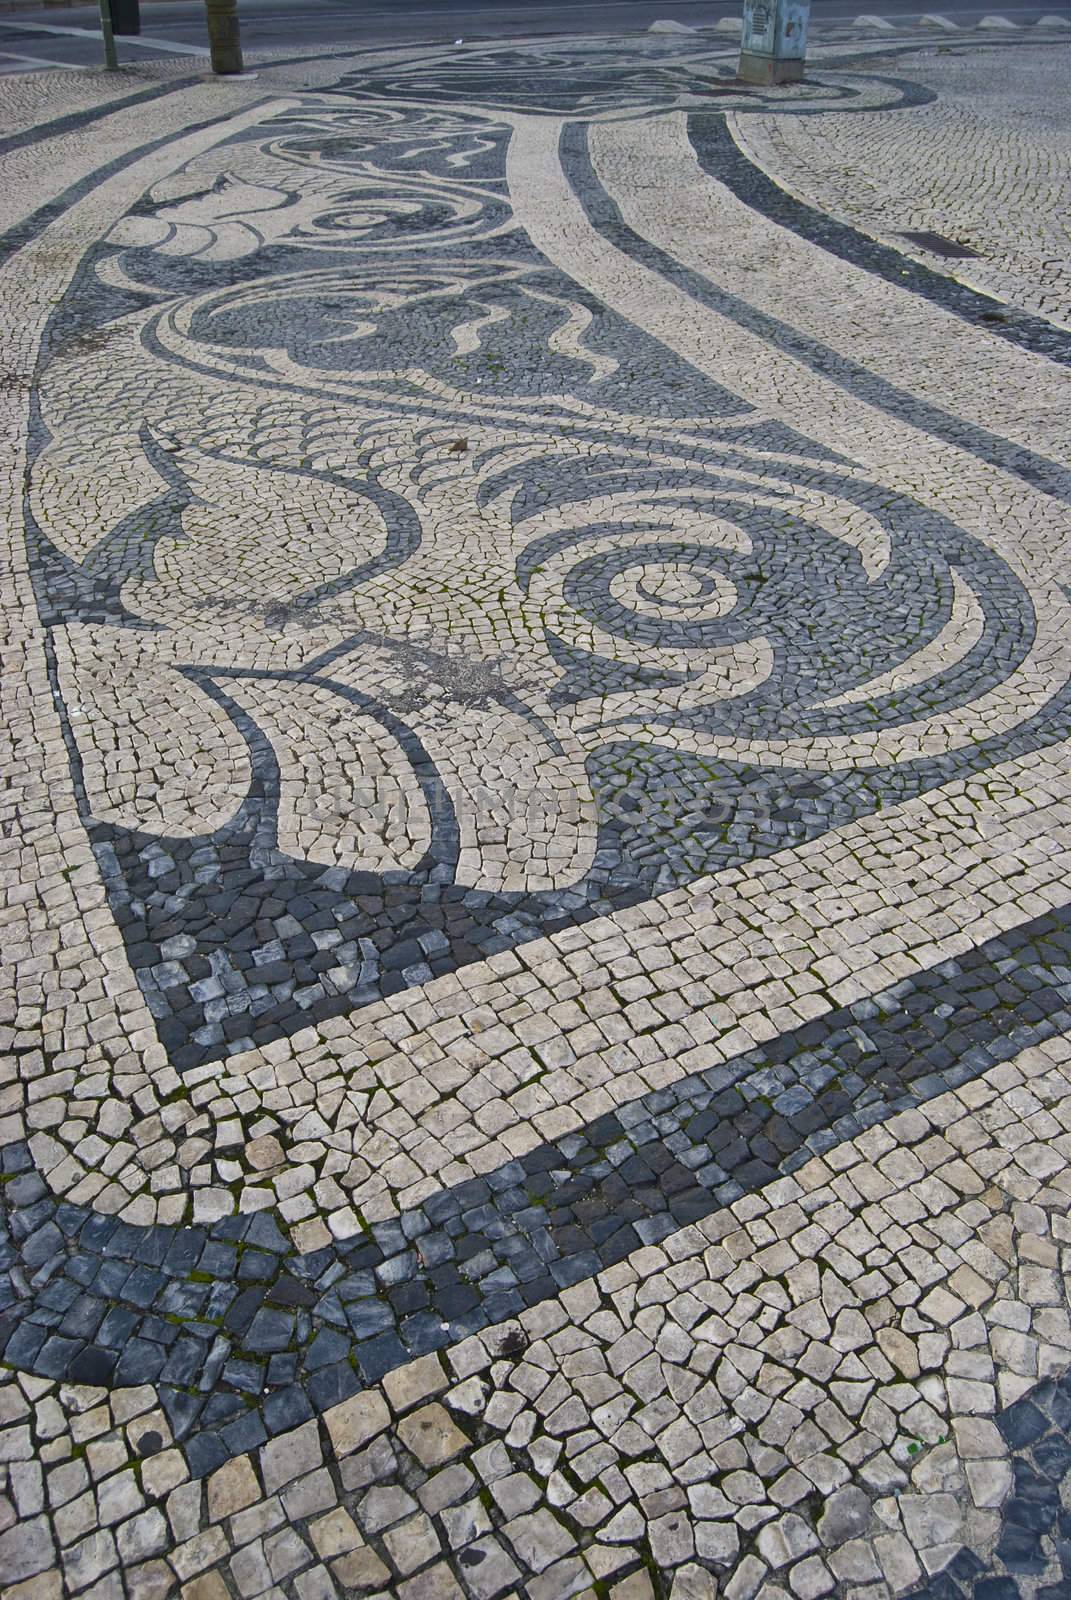 pavement showing fishes on the Praca do Comercio in Lisbon